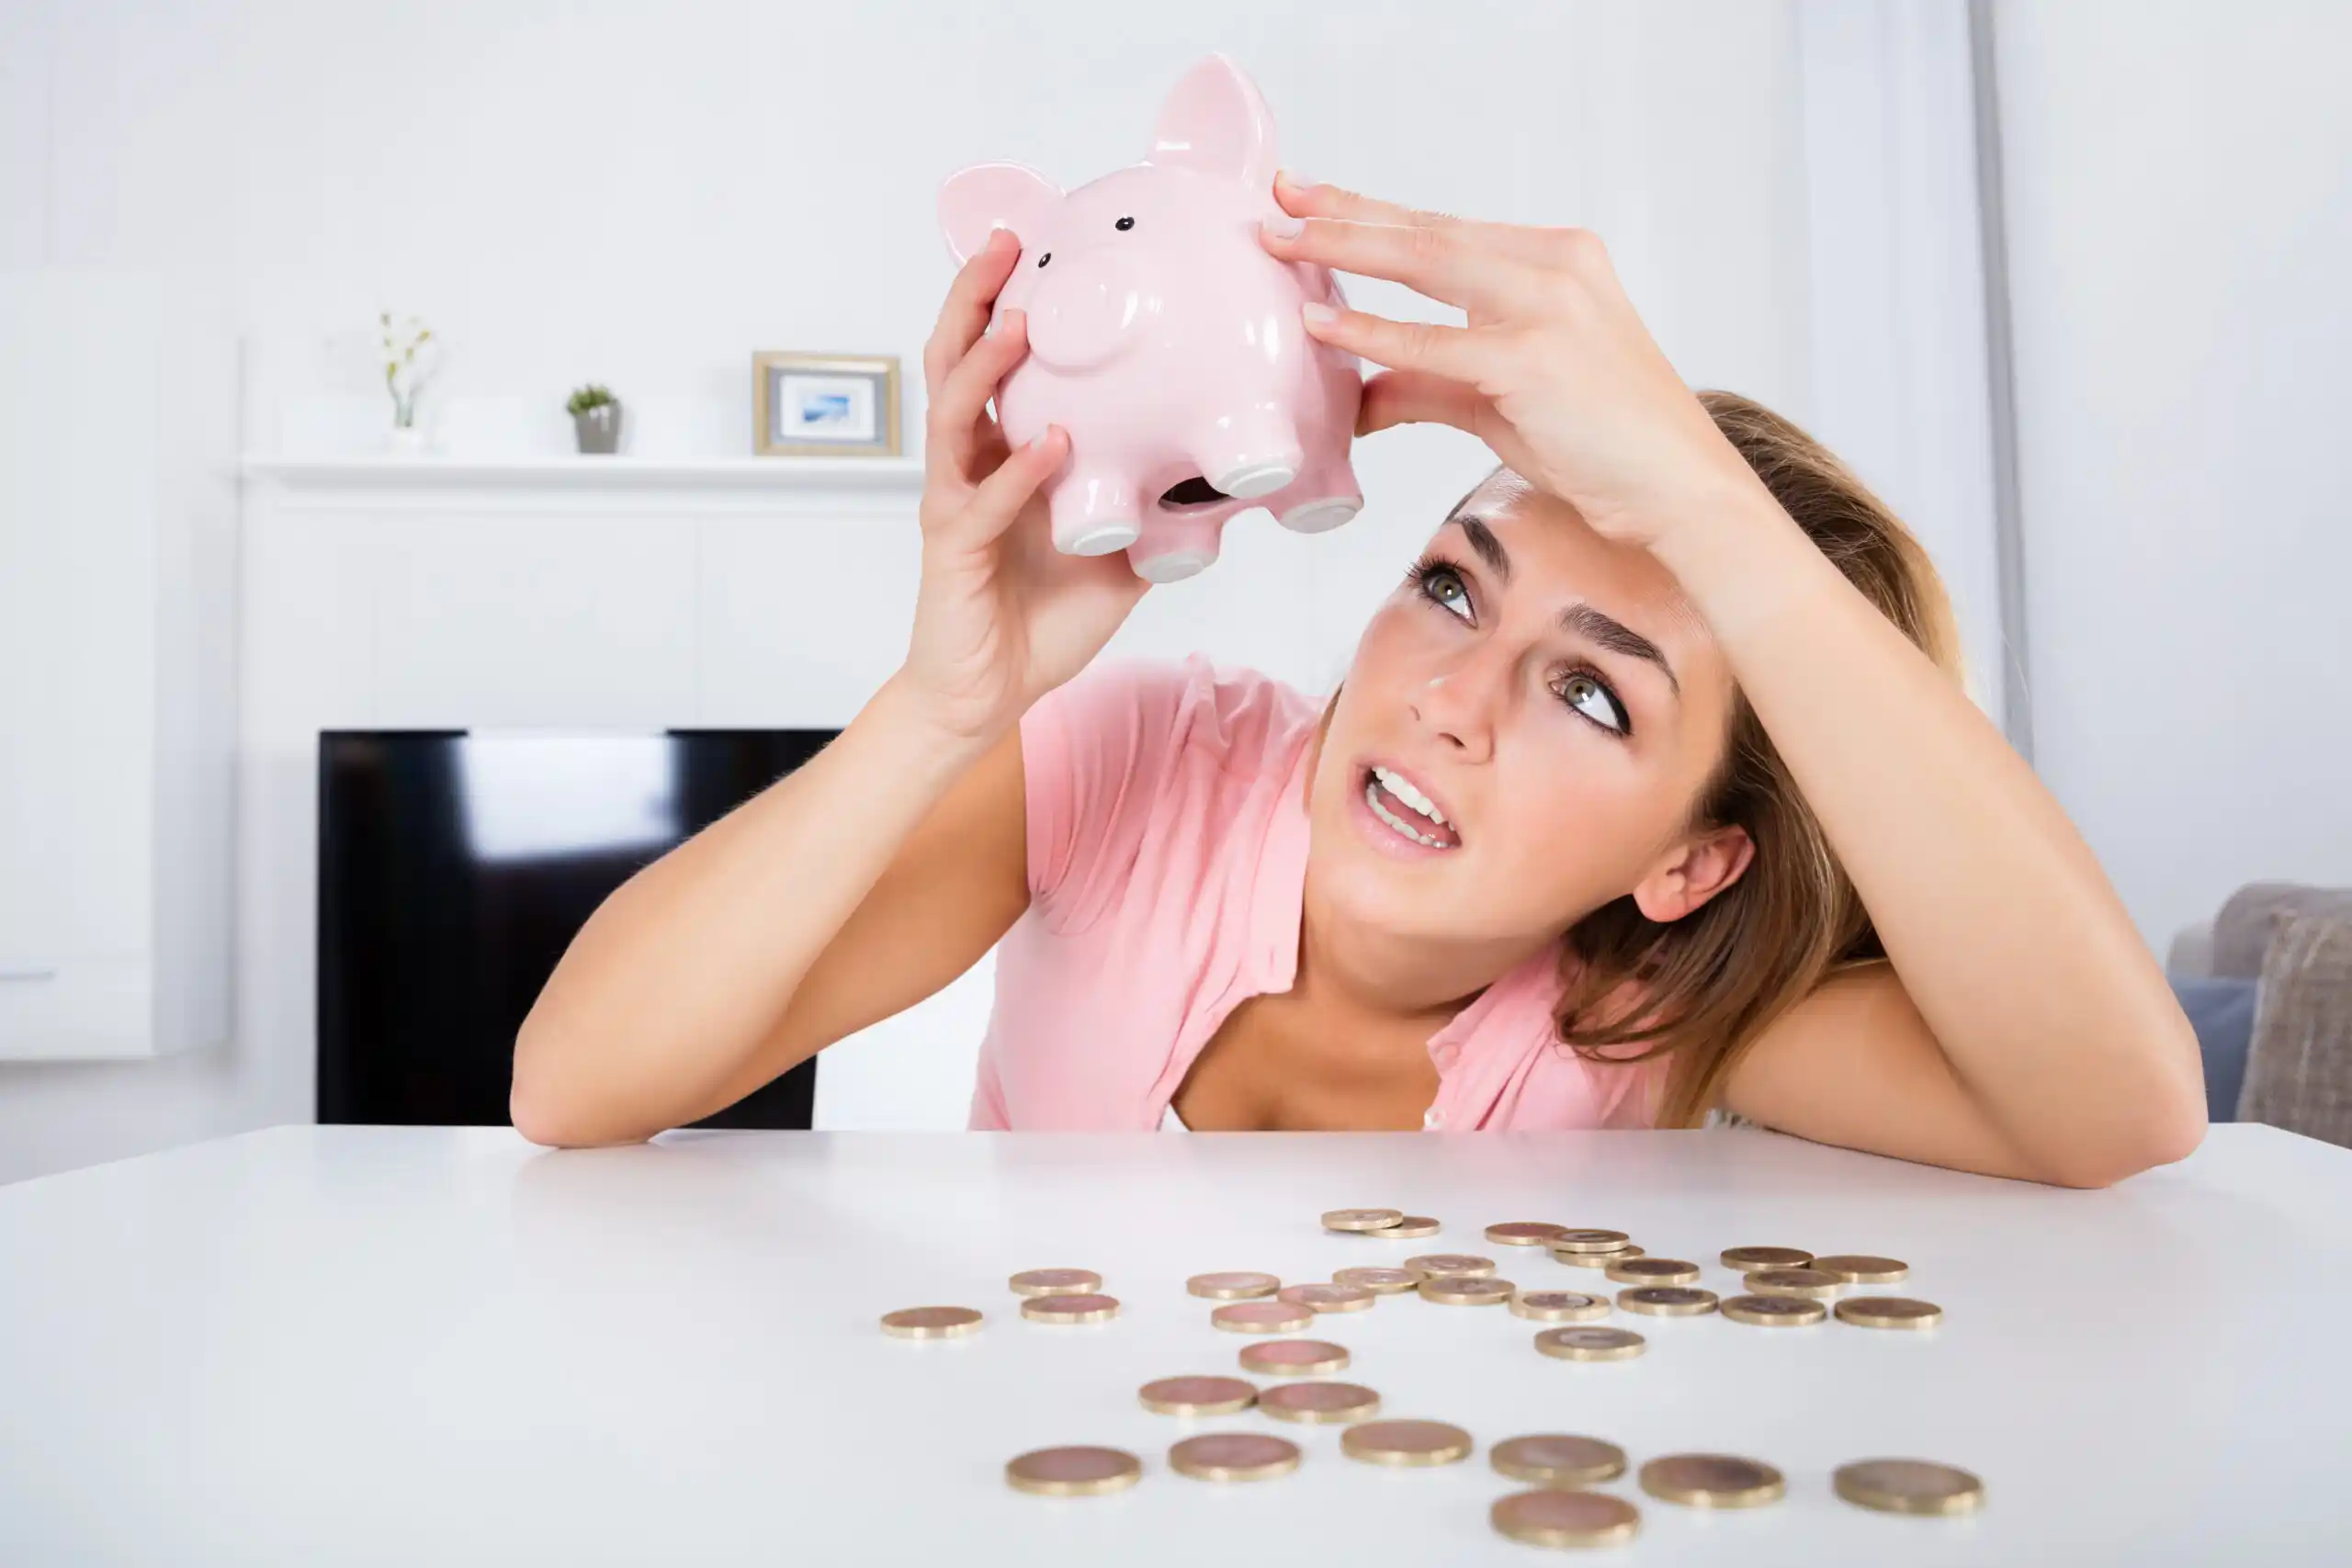 Personal Budgeting: Are You Truly Living Within Your Means?